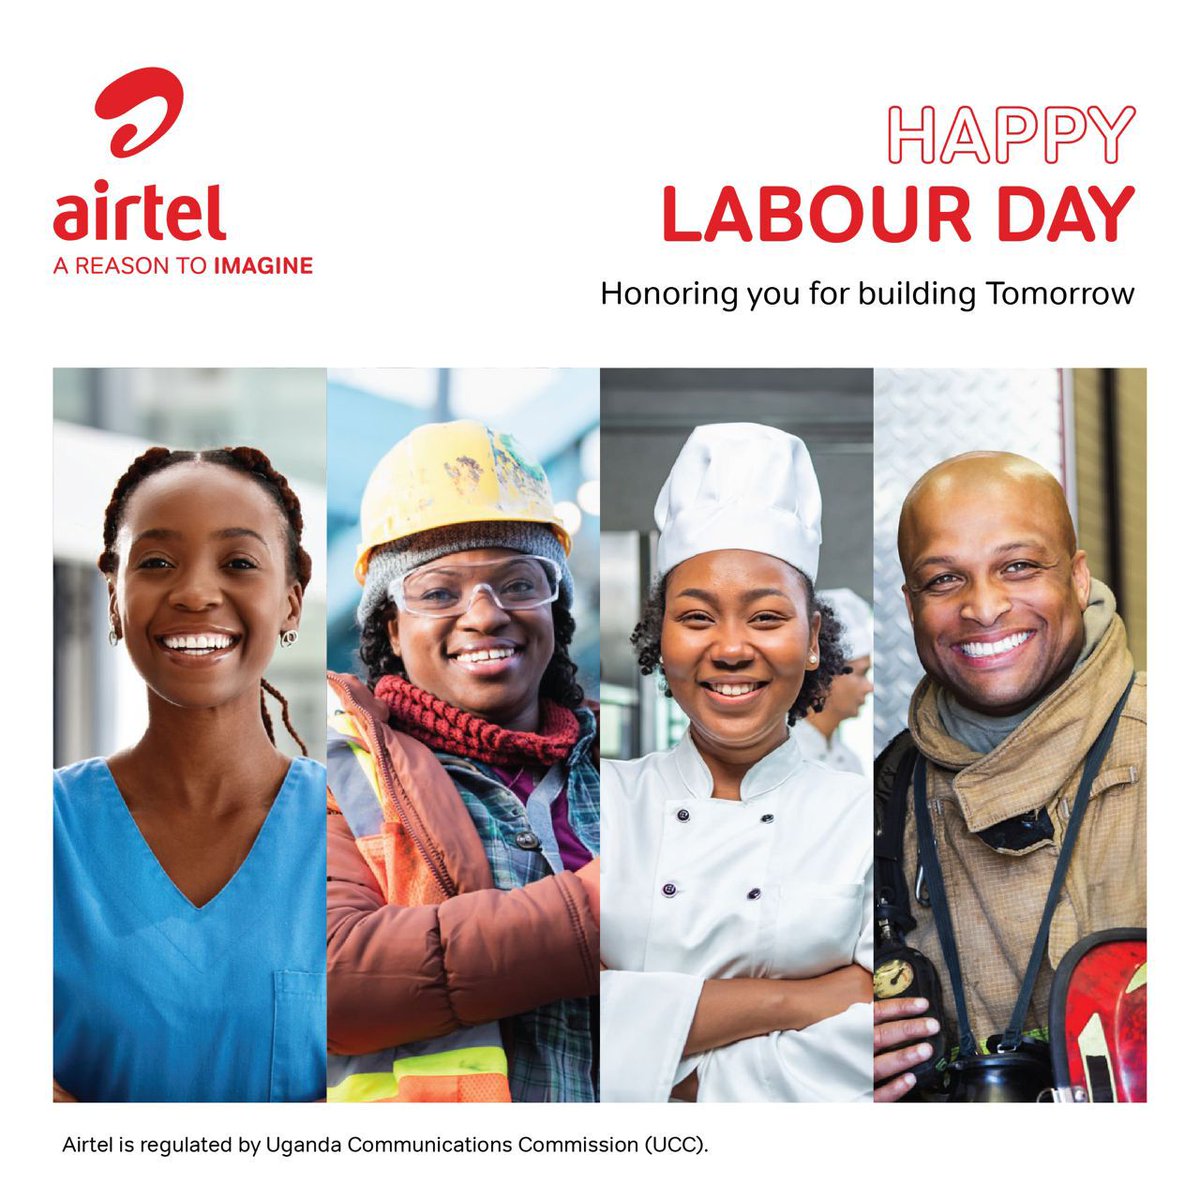 At the end of the day, @Airtel_Ug appreciates your hard work. To my fellow hustler, don't feel left out. Enjoy your Labour Day. #AirtelCares